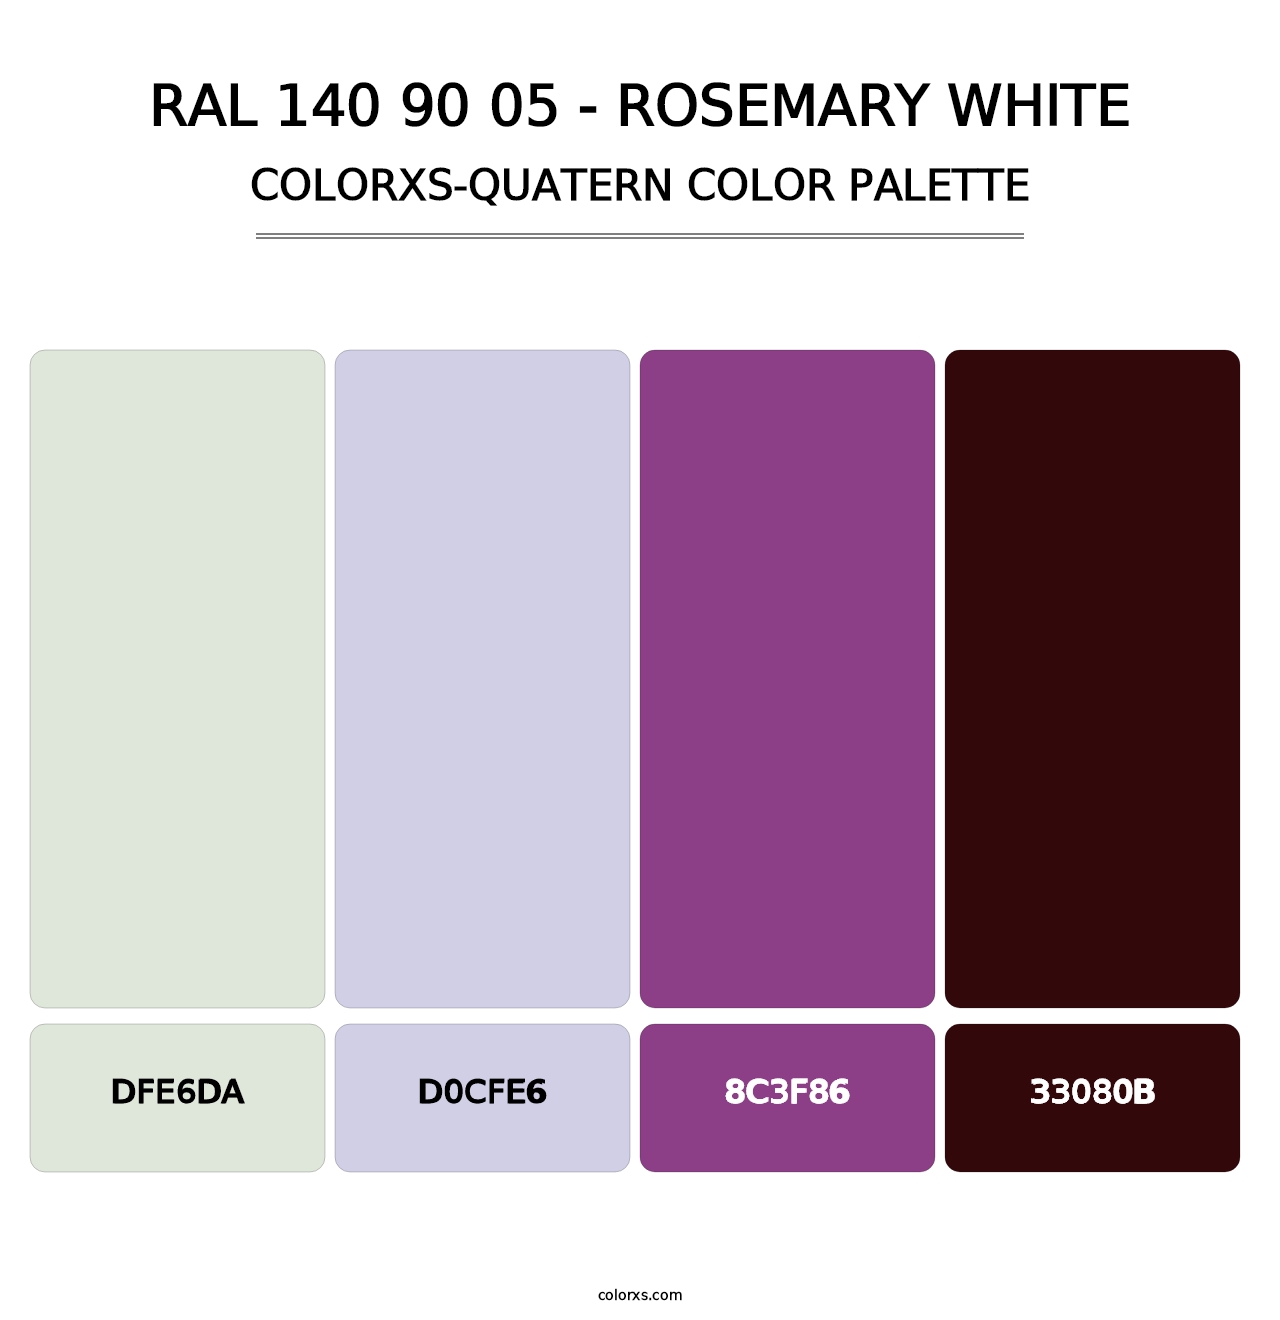 RAL 140 90 05 - Rosemary White - Colorxs Quatern Palette